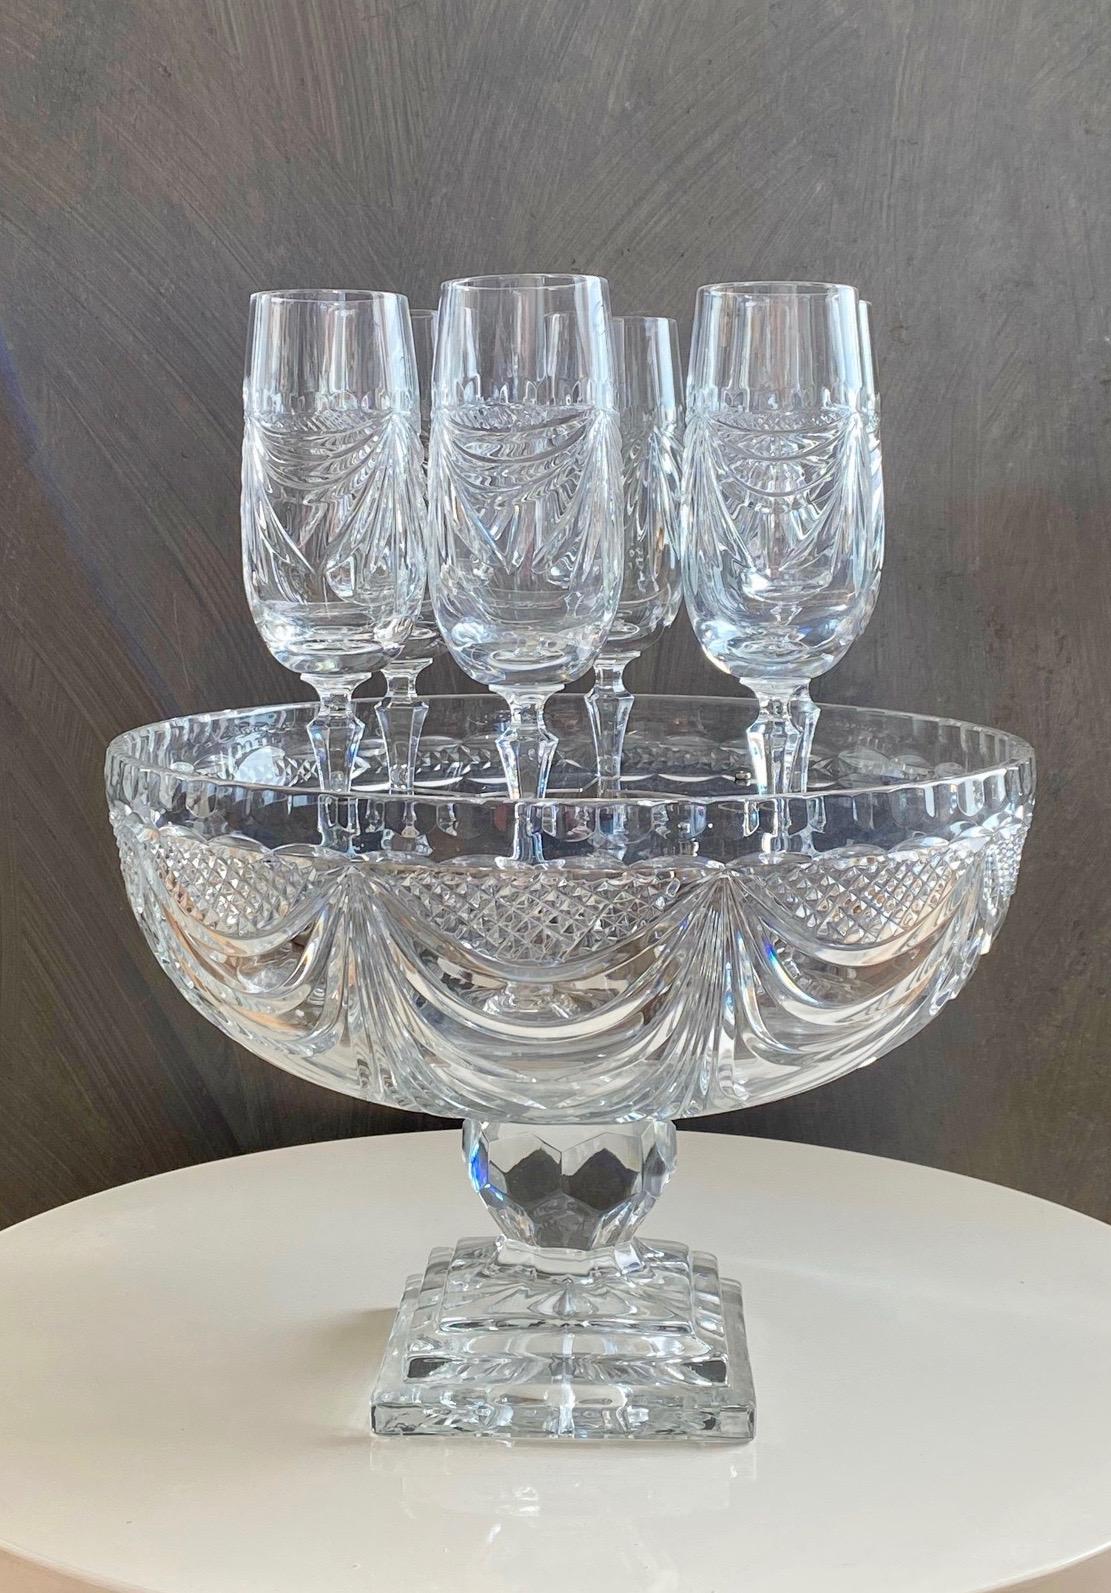 Champagne cellar from Lorraine crystal glassware, blown with the mouth and carved with hands. This handmade piece comes with six crystal champagne glasses from the same manufacture. This wonderful piece is made with 24% of lead. The base that holds